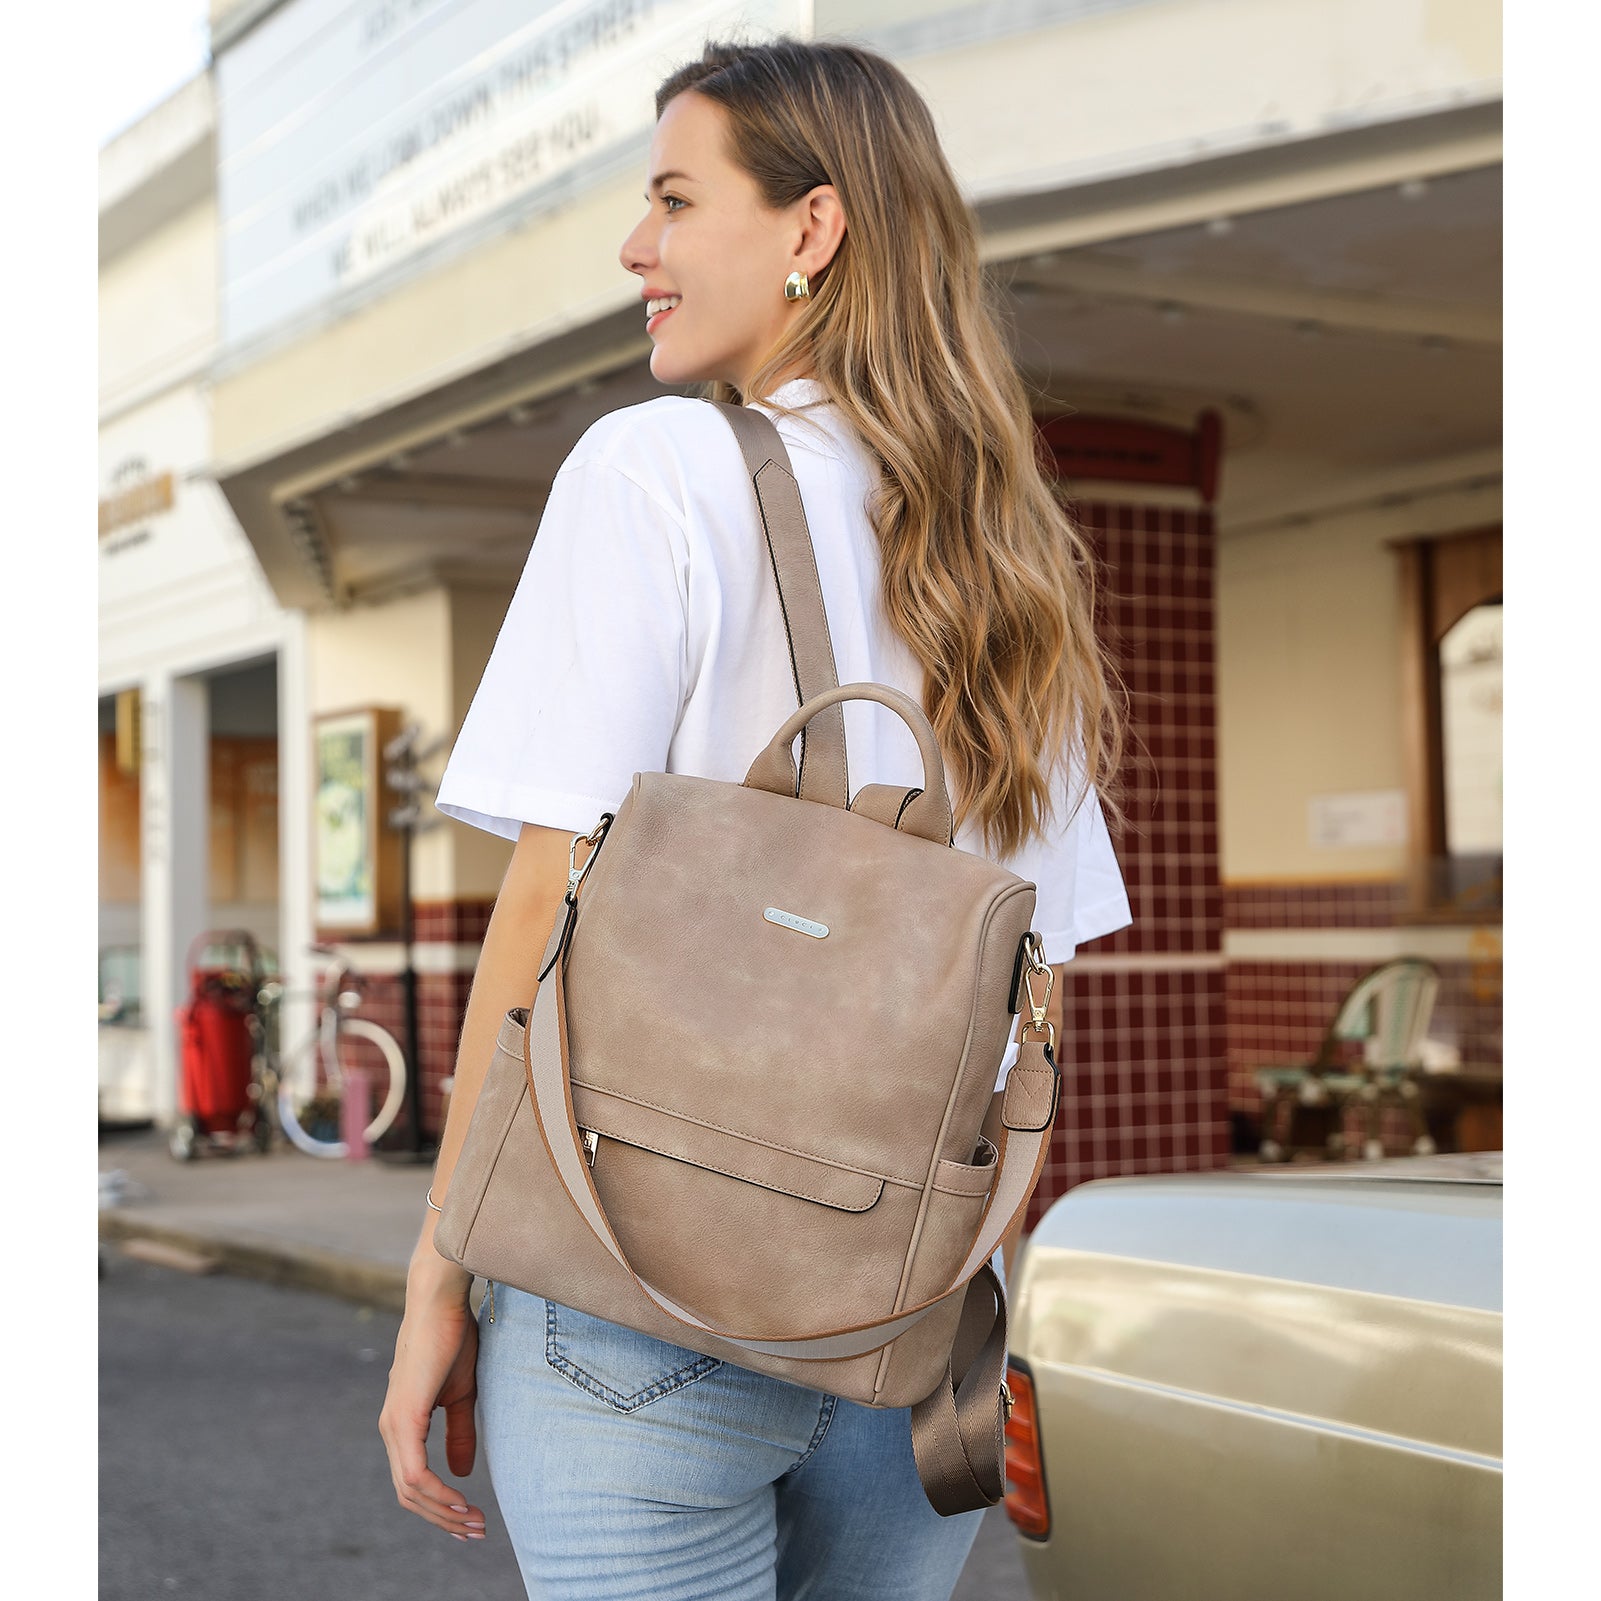 Women Vegan Leather Backpack Purse Fashion Travel Backpack with Convertible Shoulder Strap | Cluci, Brown